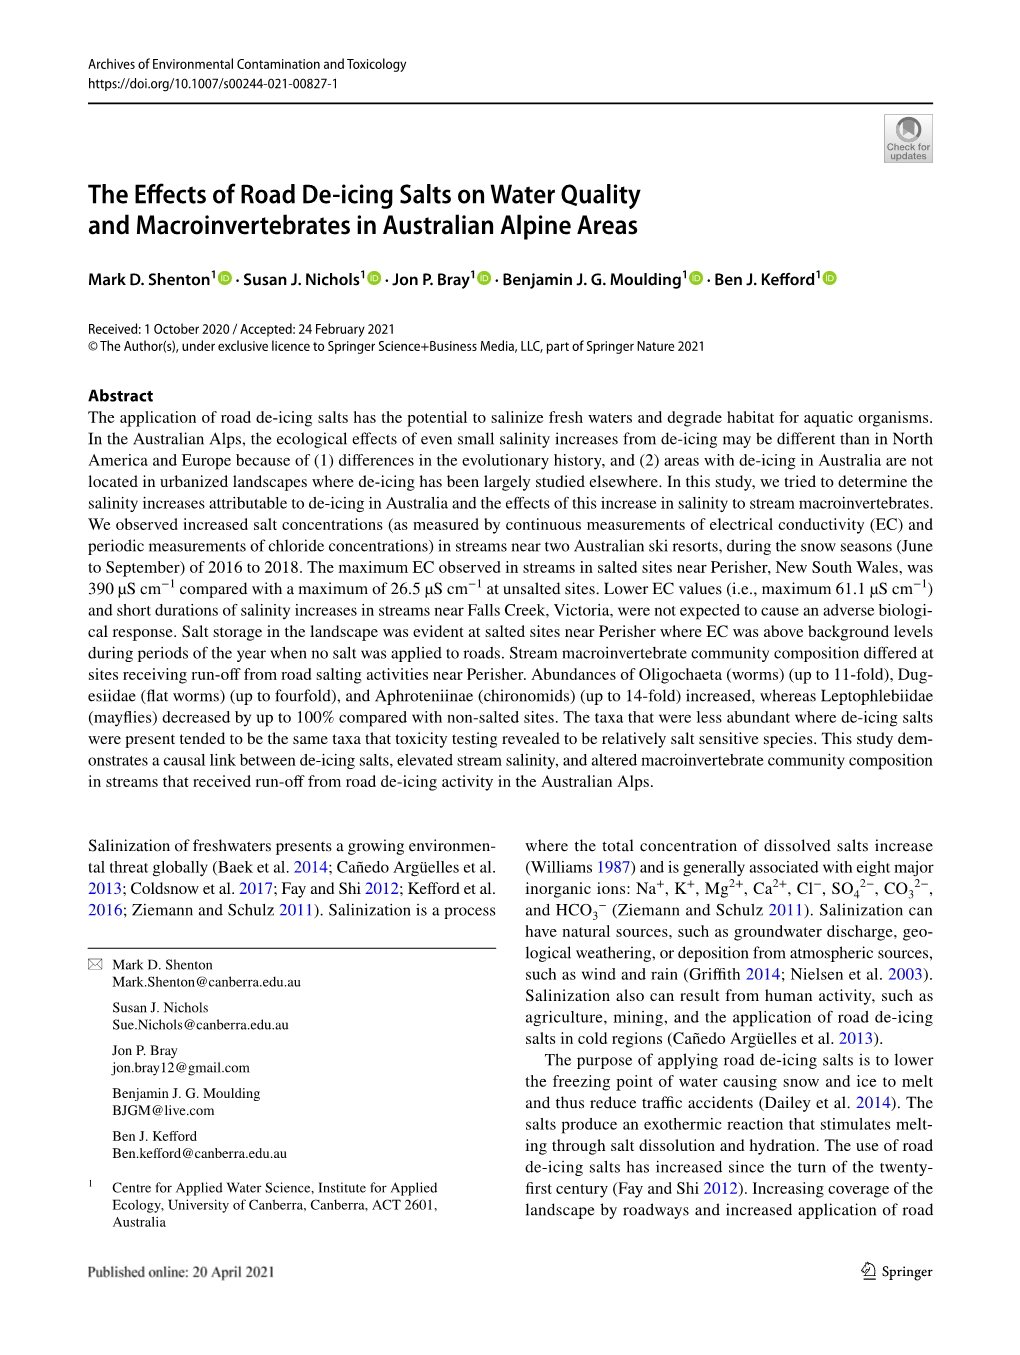 The Effects of Road De-Icing Salts on Water Quality And